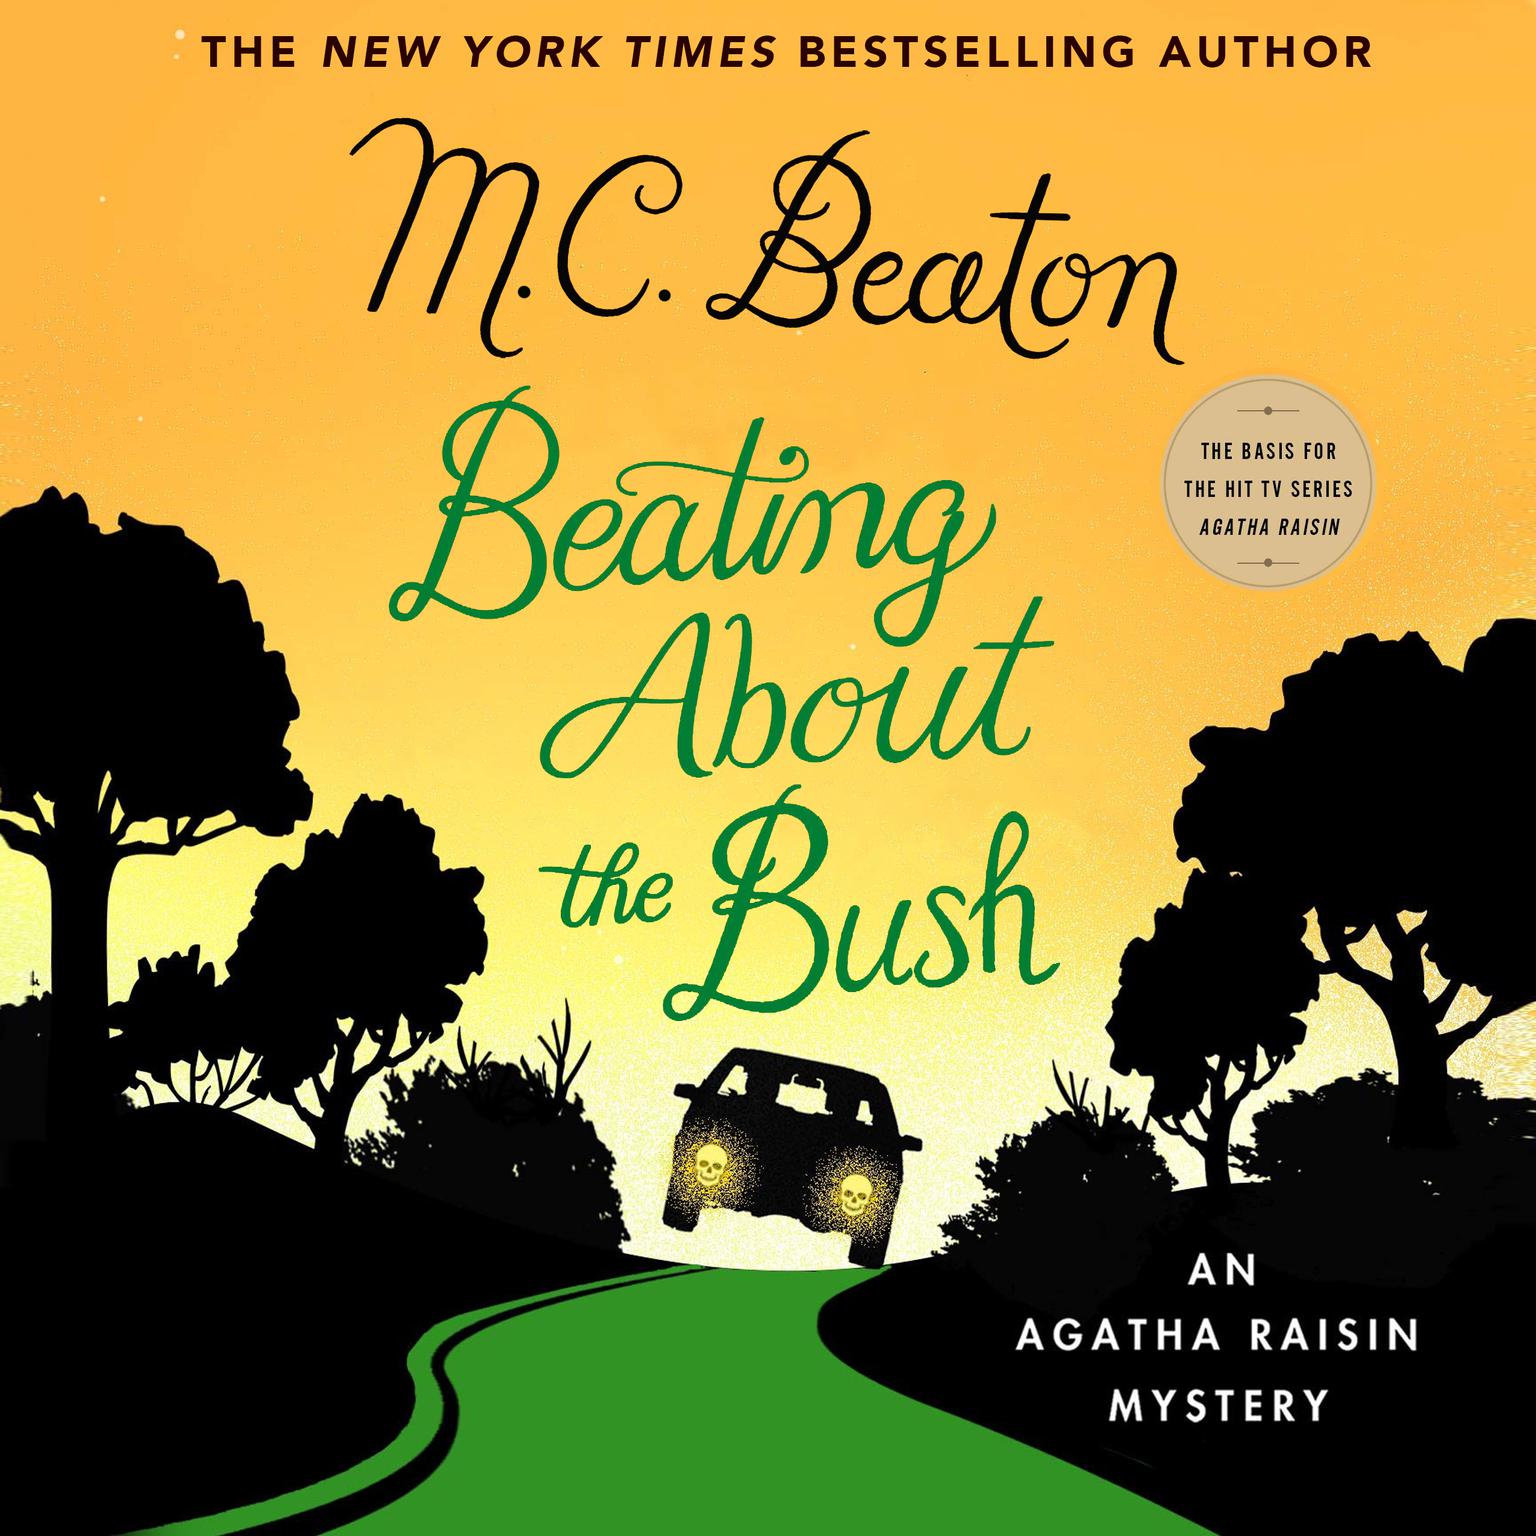 Beating About the Bush: An Agatha Raisin Mystery Audiobook, by M. C. Beaton